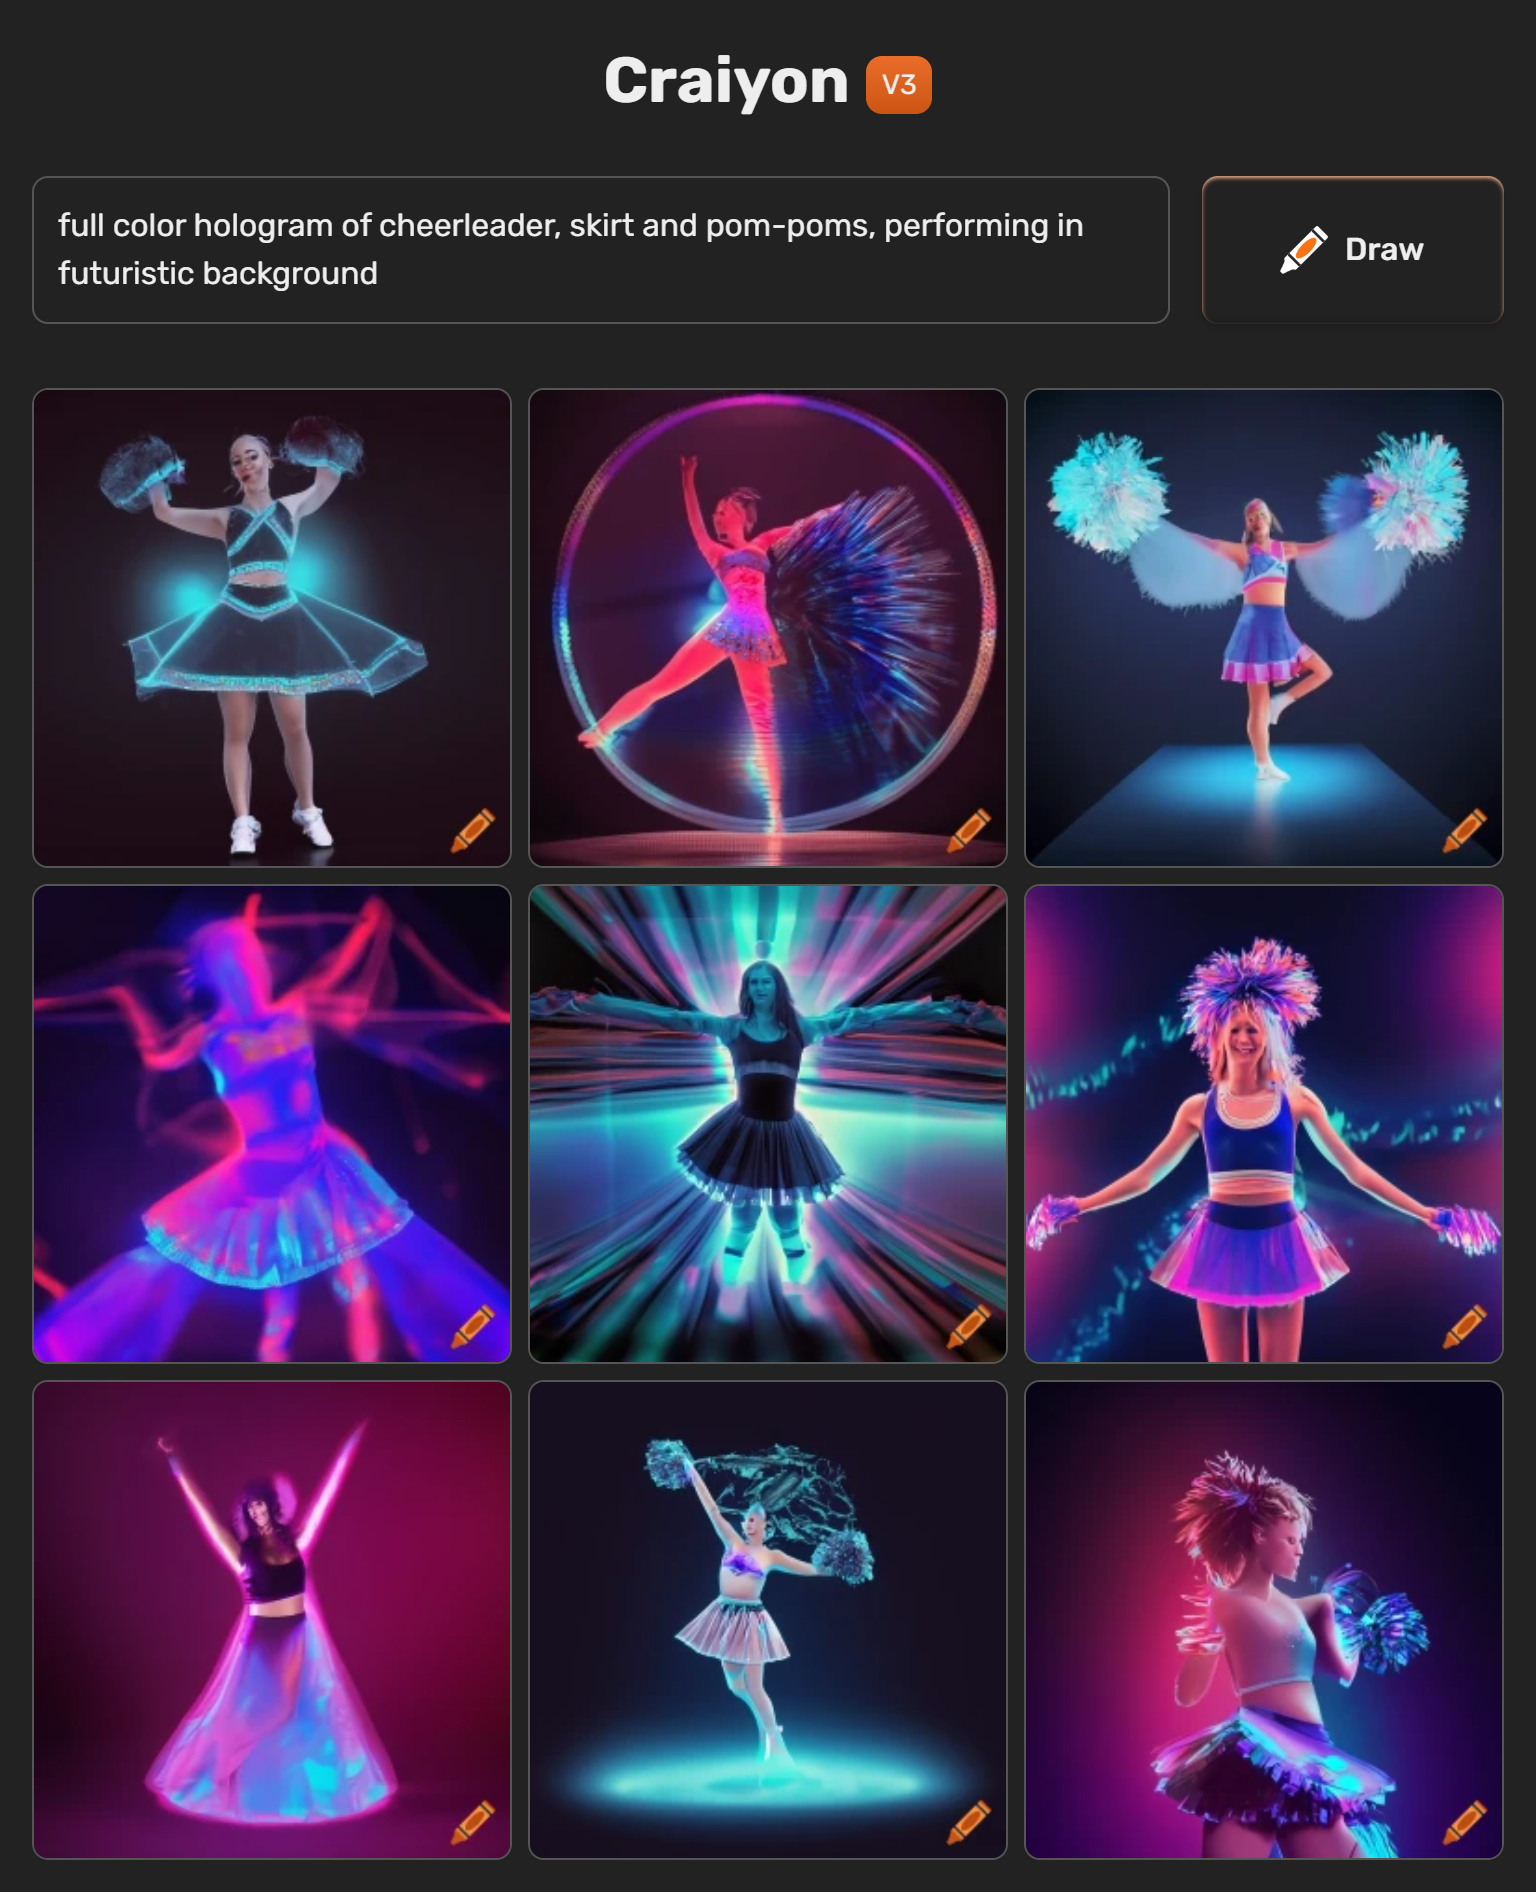 craiyon_192704_full_color_hologram_of_cheerleader__skirt_and_pom_poms__performing_in_futuristic_background.png